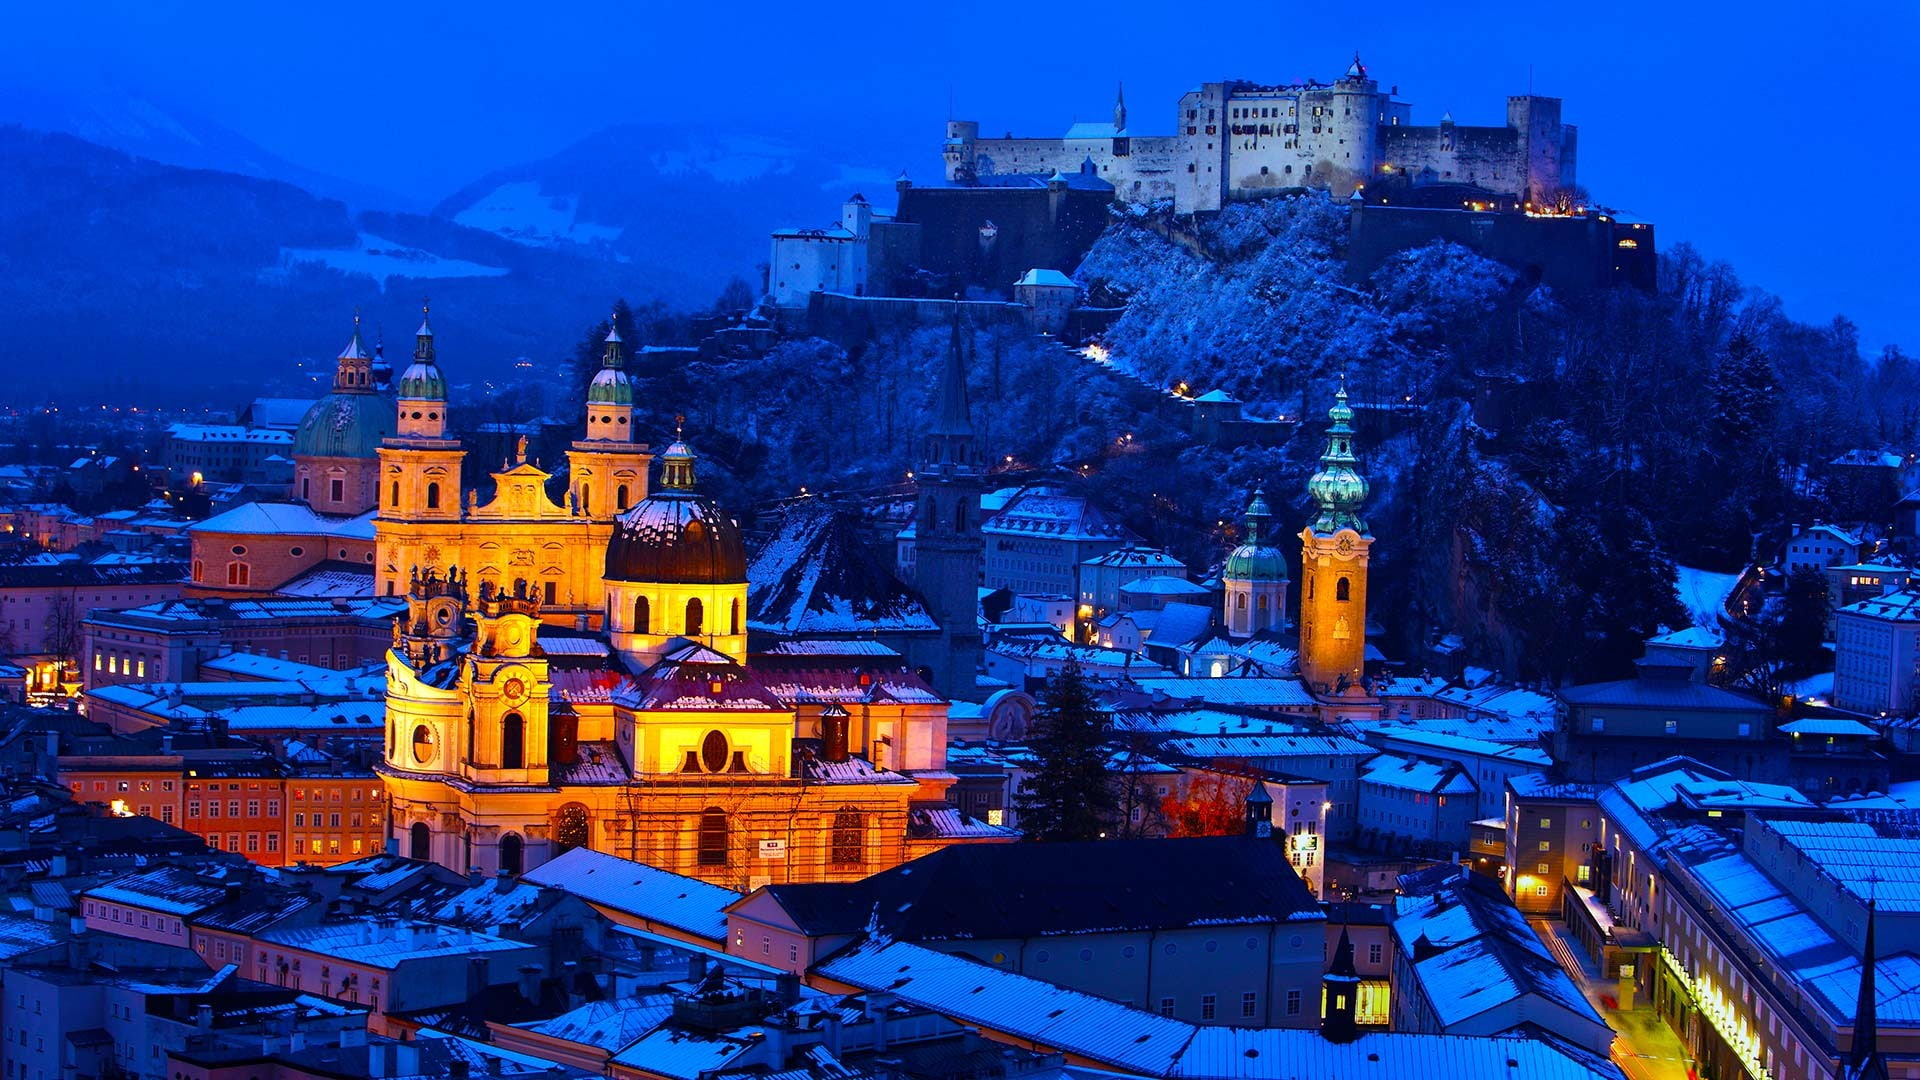 architecture building old building town house salzburg austria winter snow evening lights church cathedral castle hill rock rooftops ancient